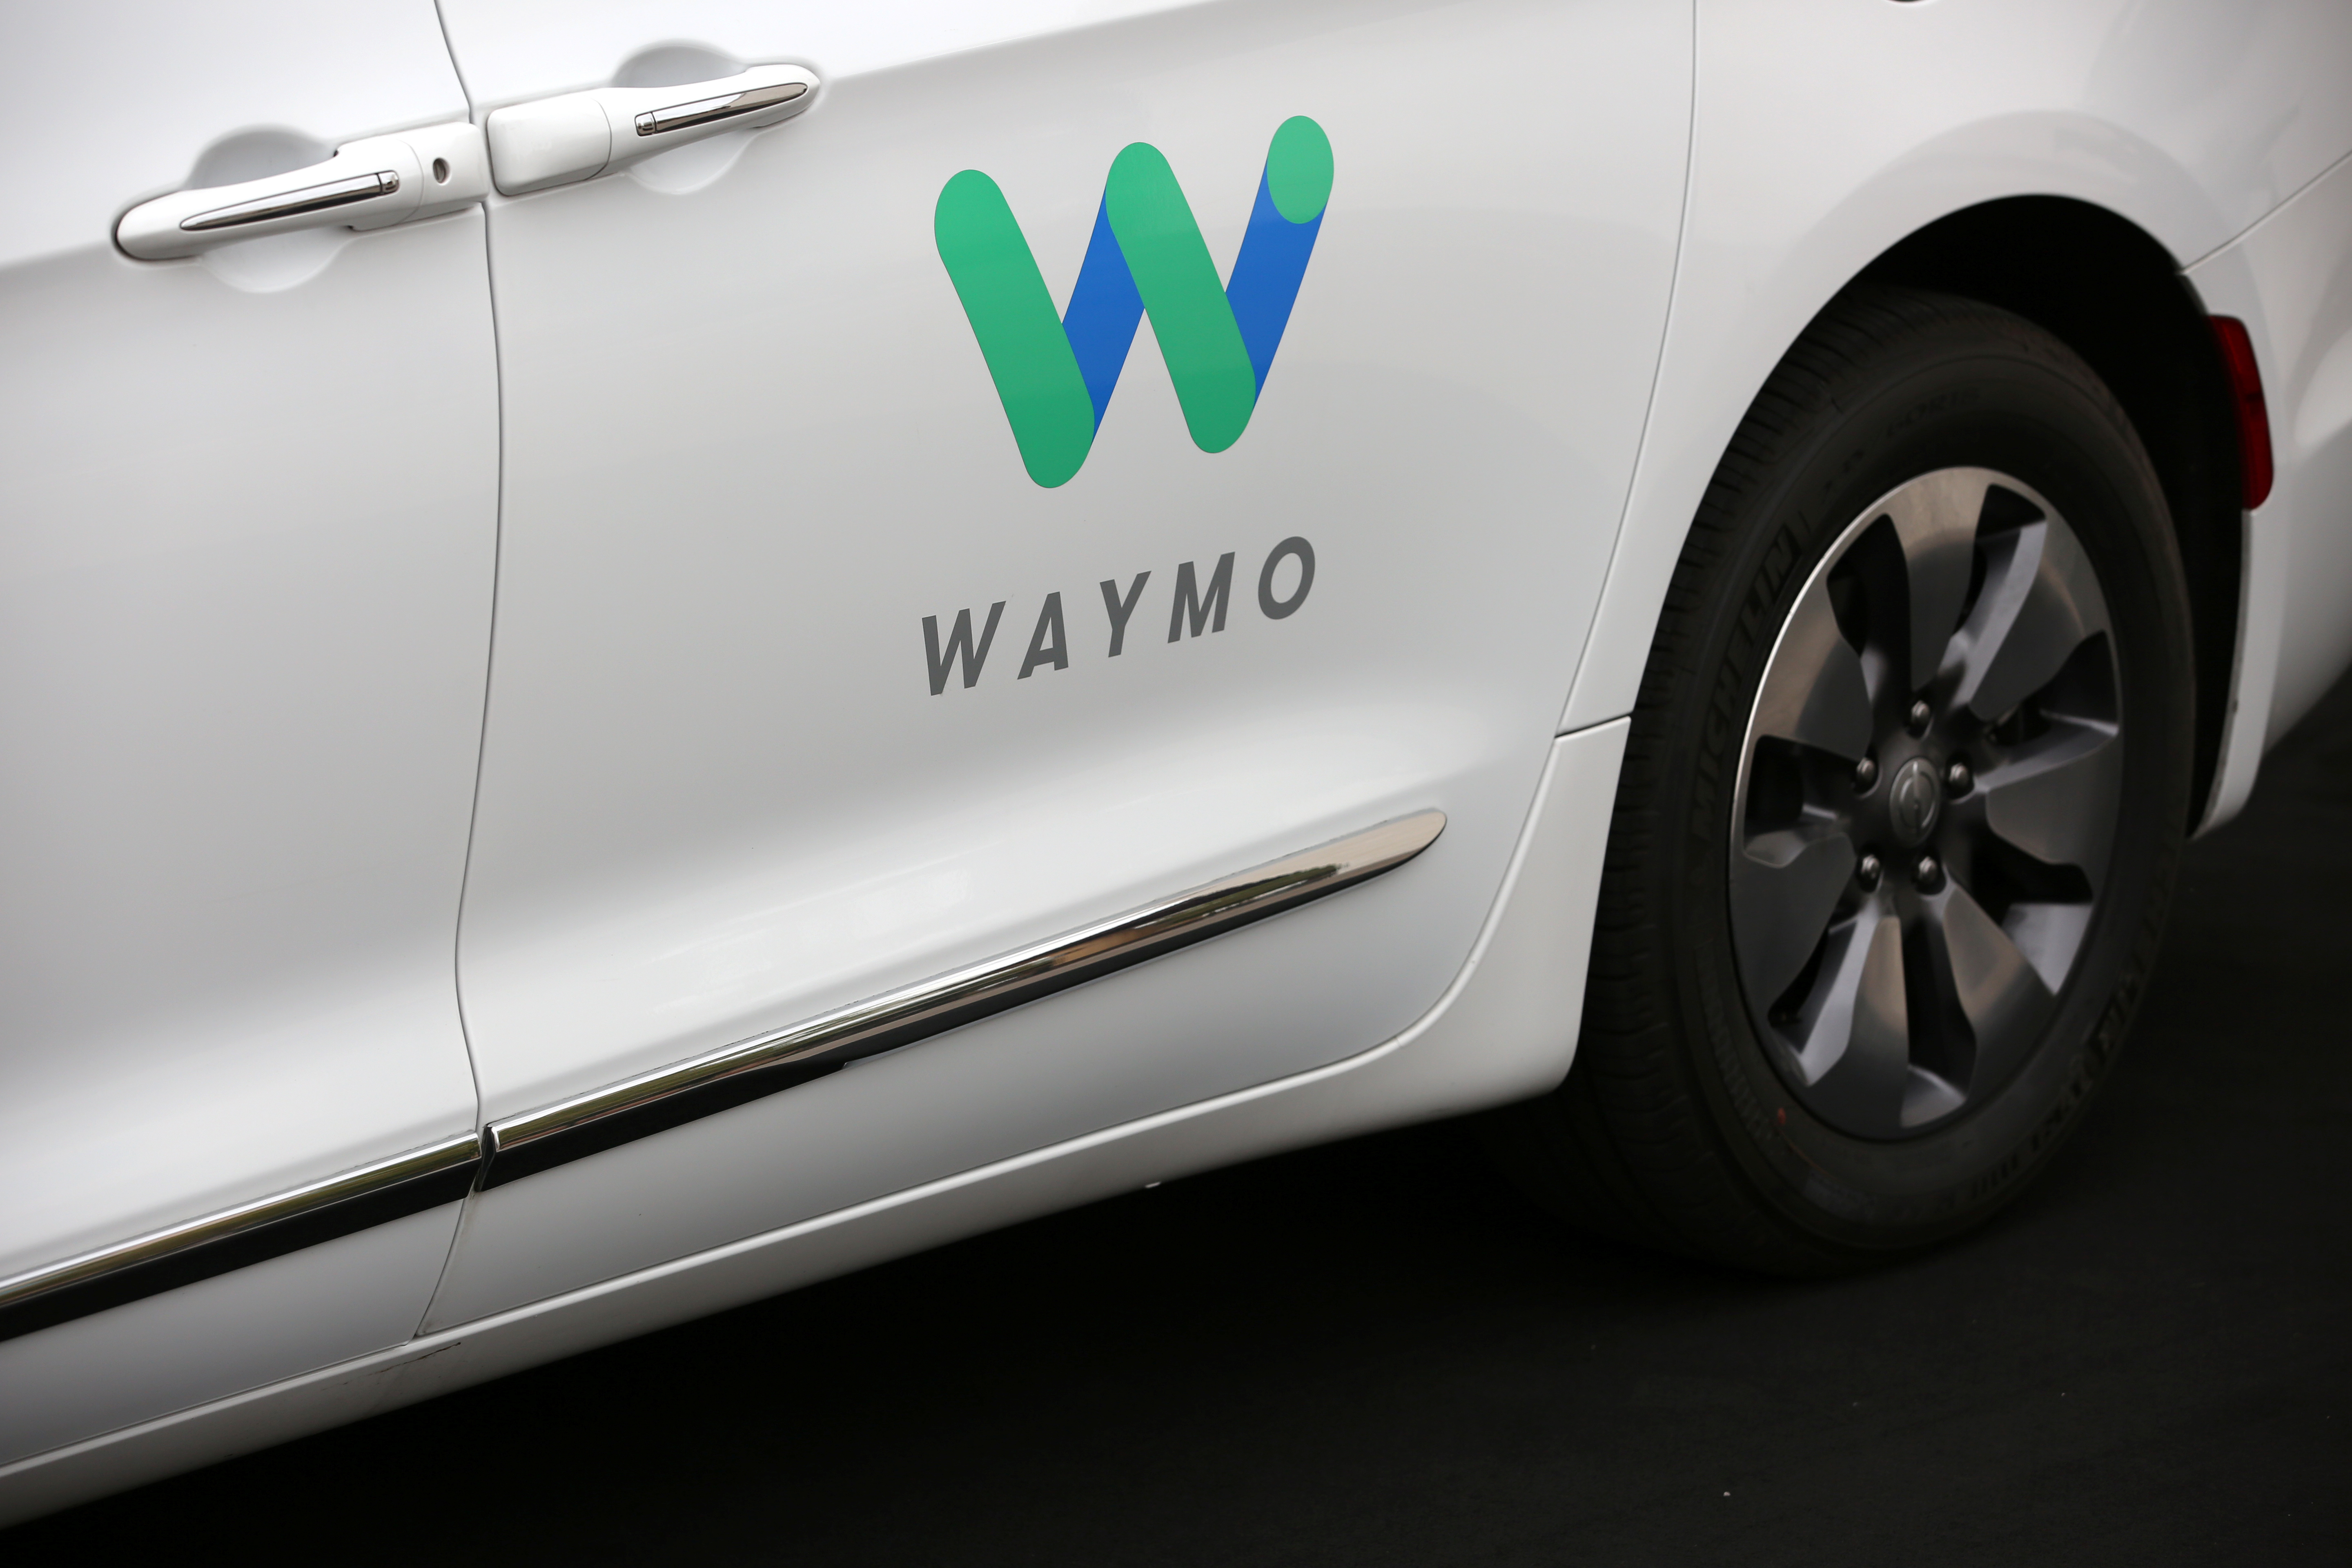 A Waymo Chrysler Pacifica Hybrid self-driving vehicle is parked and displayed during a demonstration in Chandler, Arizona